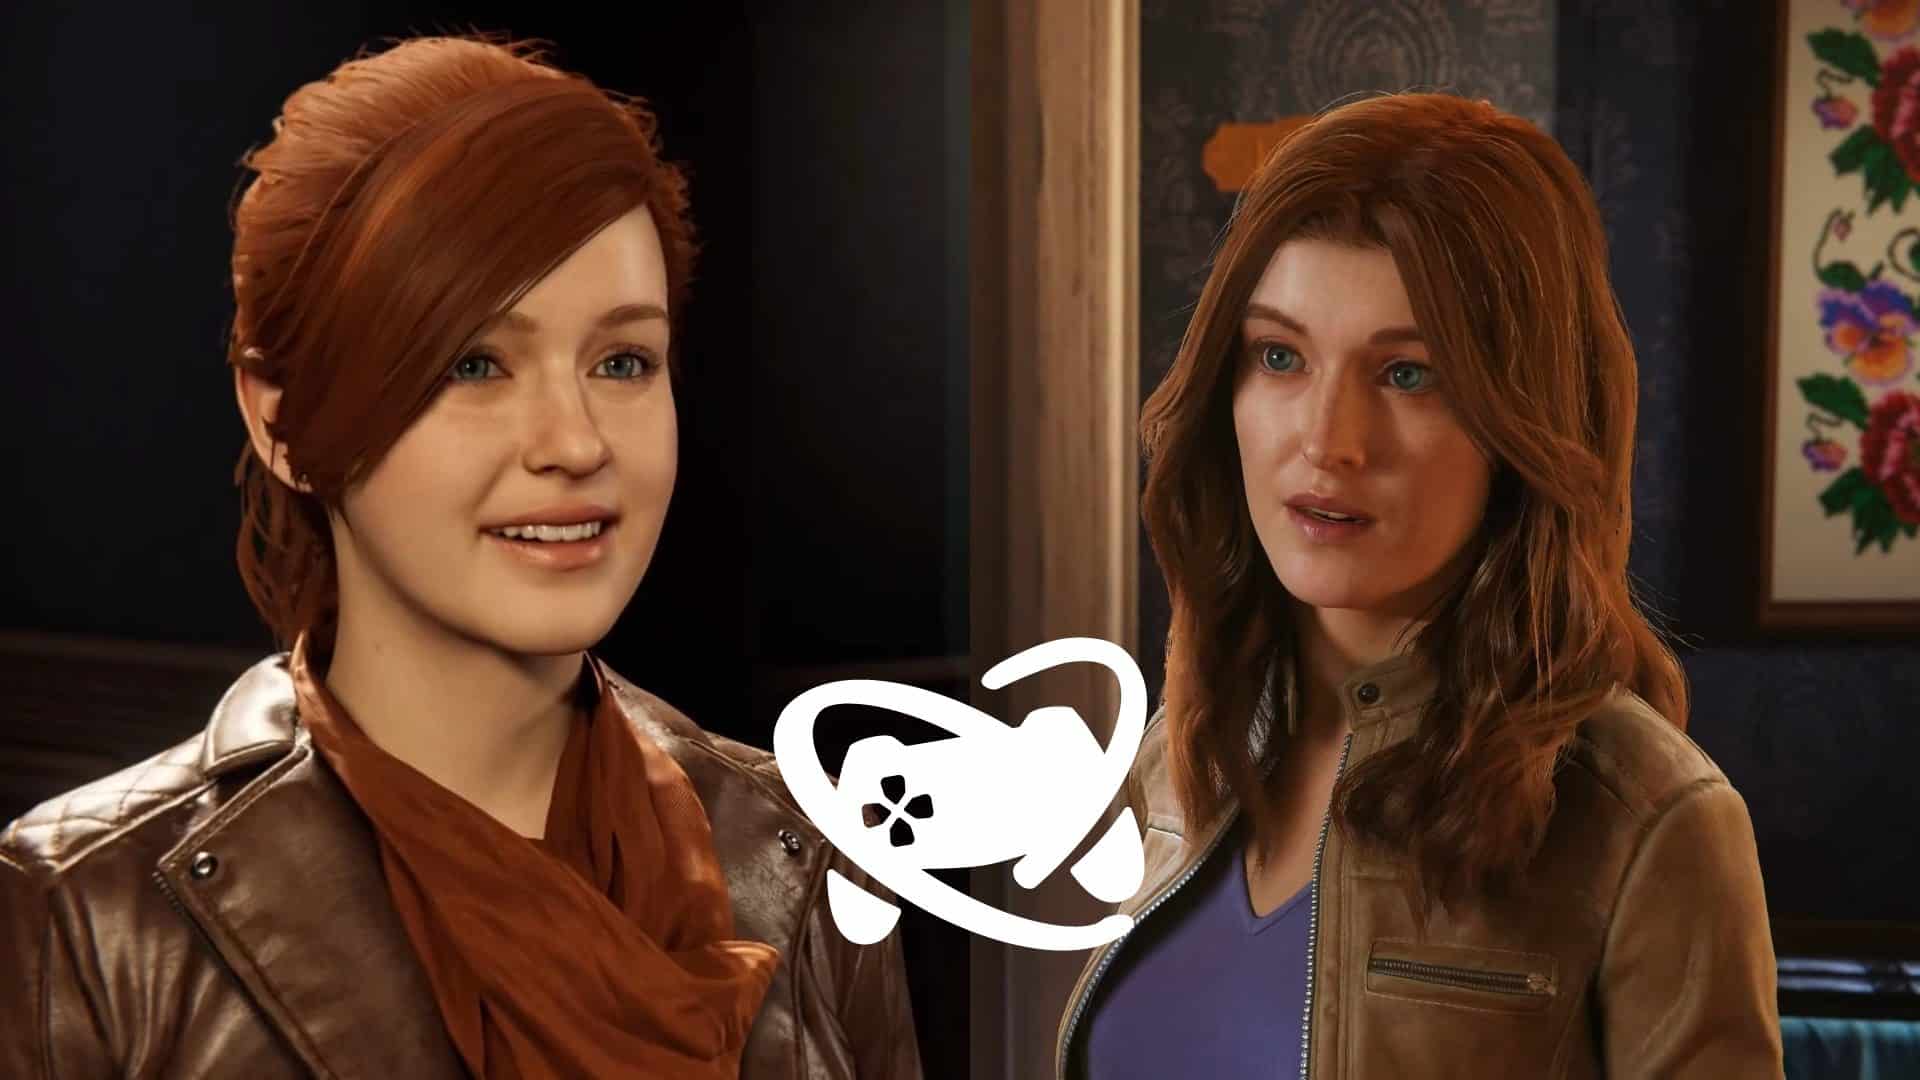 Mary Jane’s cast is the same as in the first game